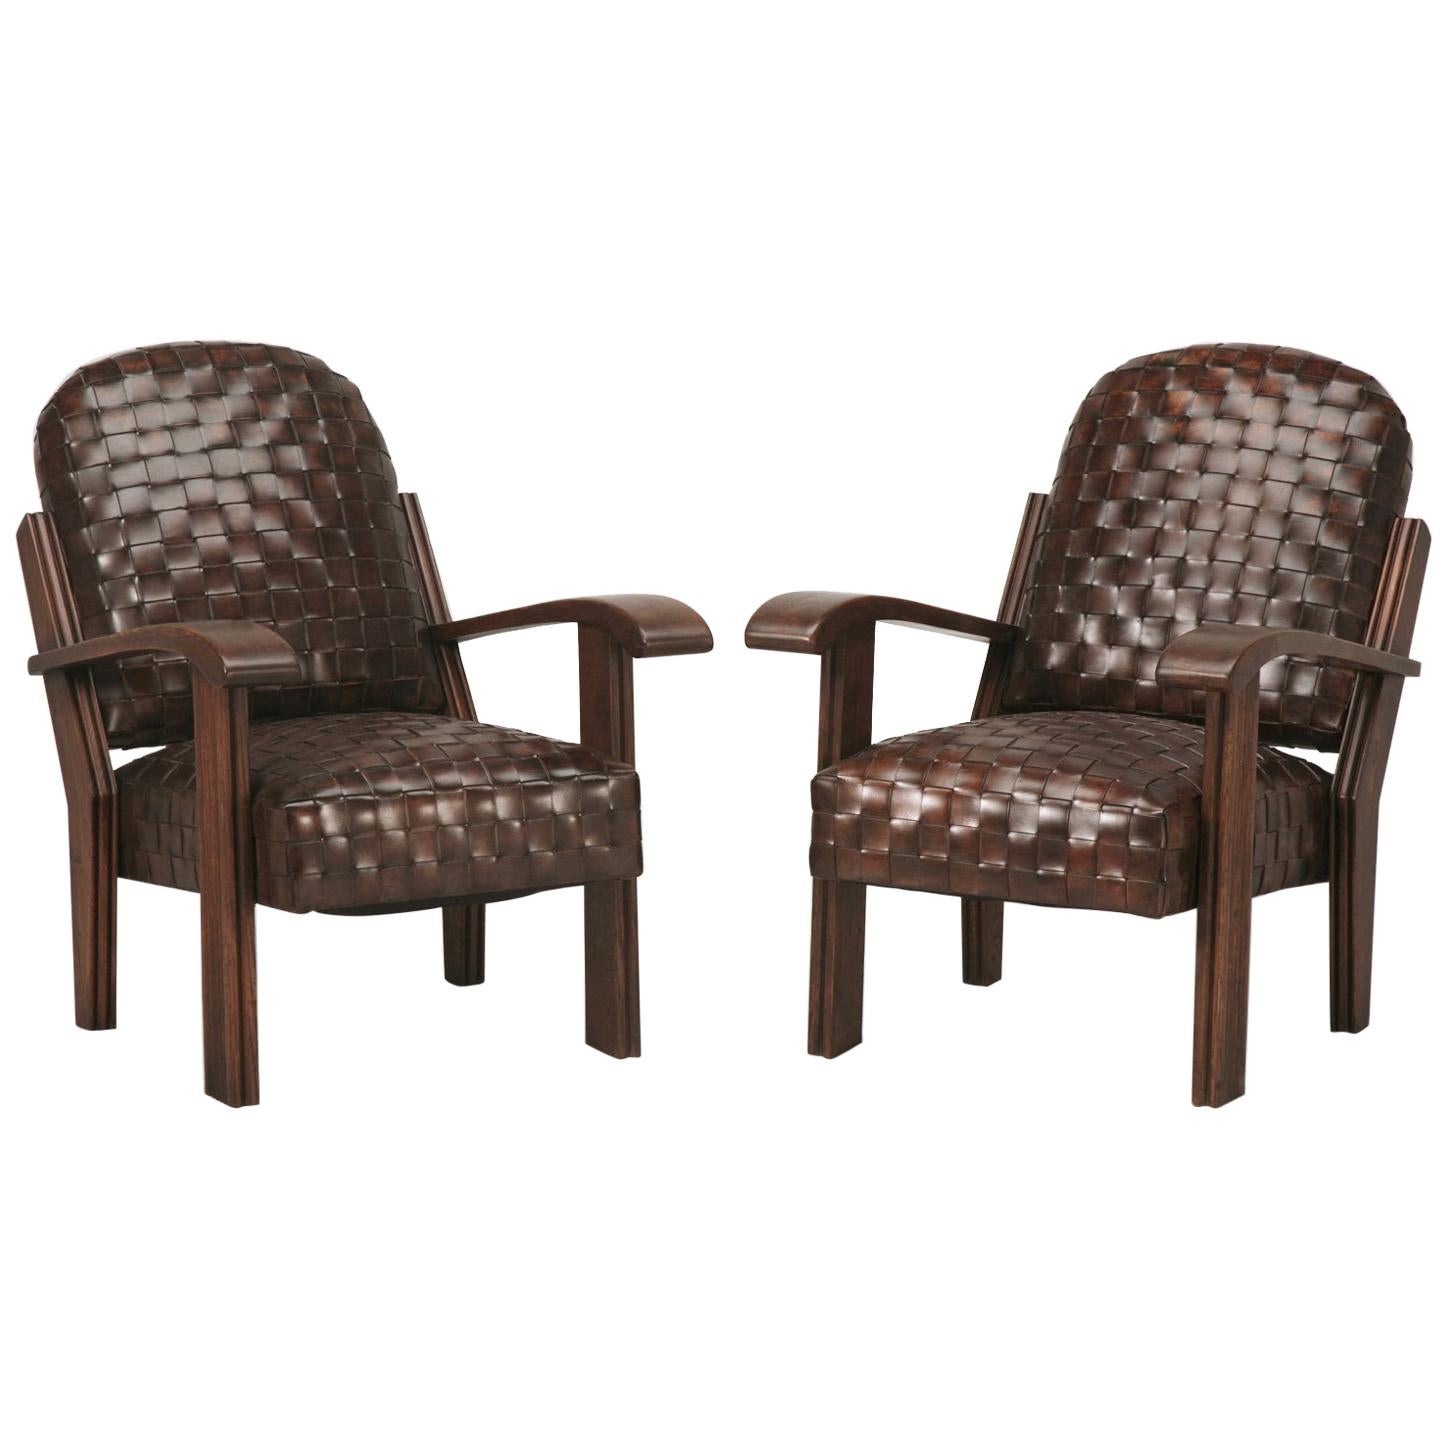 Art Deco or Late Arts & Craft Handwoven Leather Club Chairs